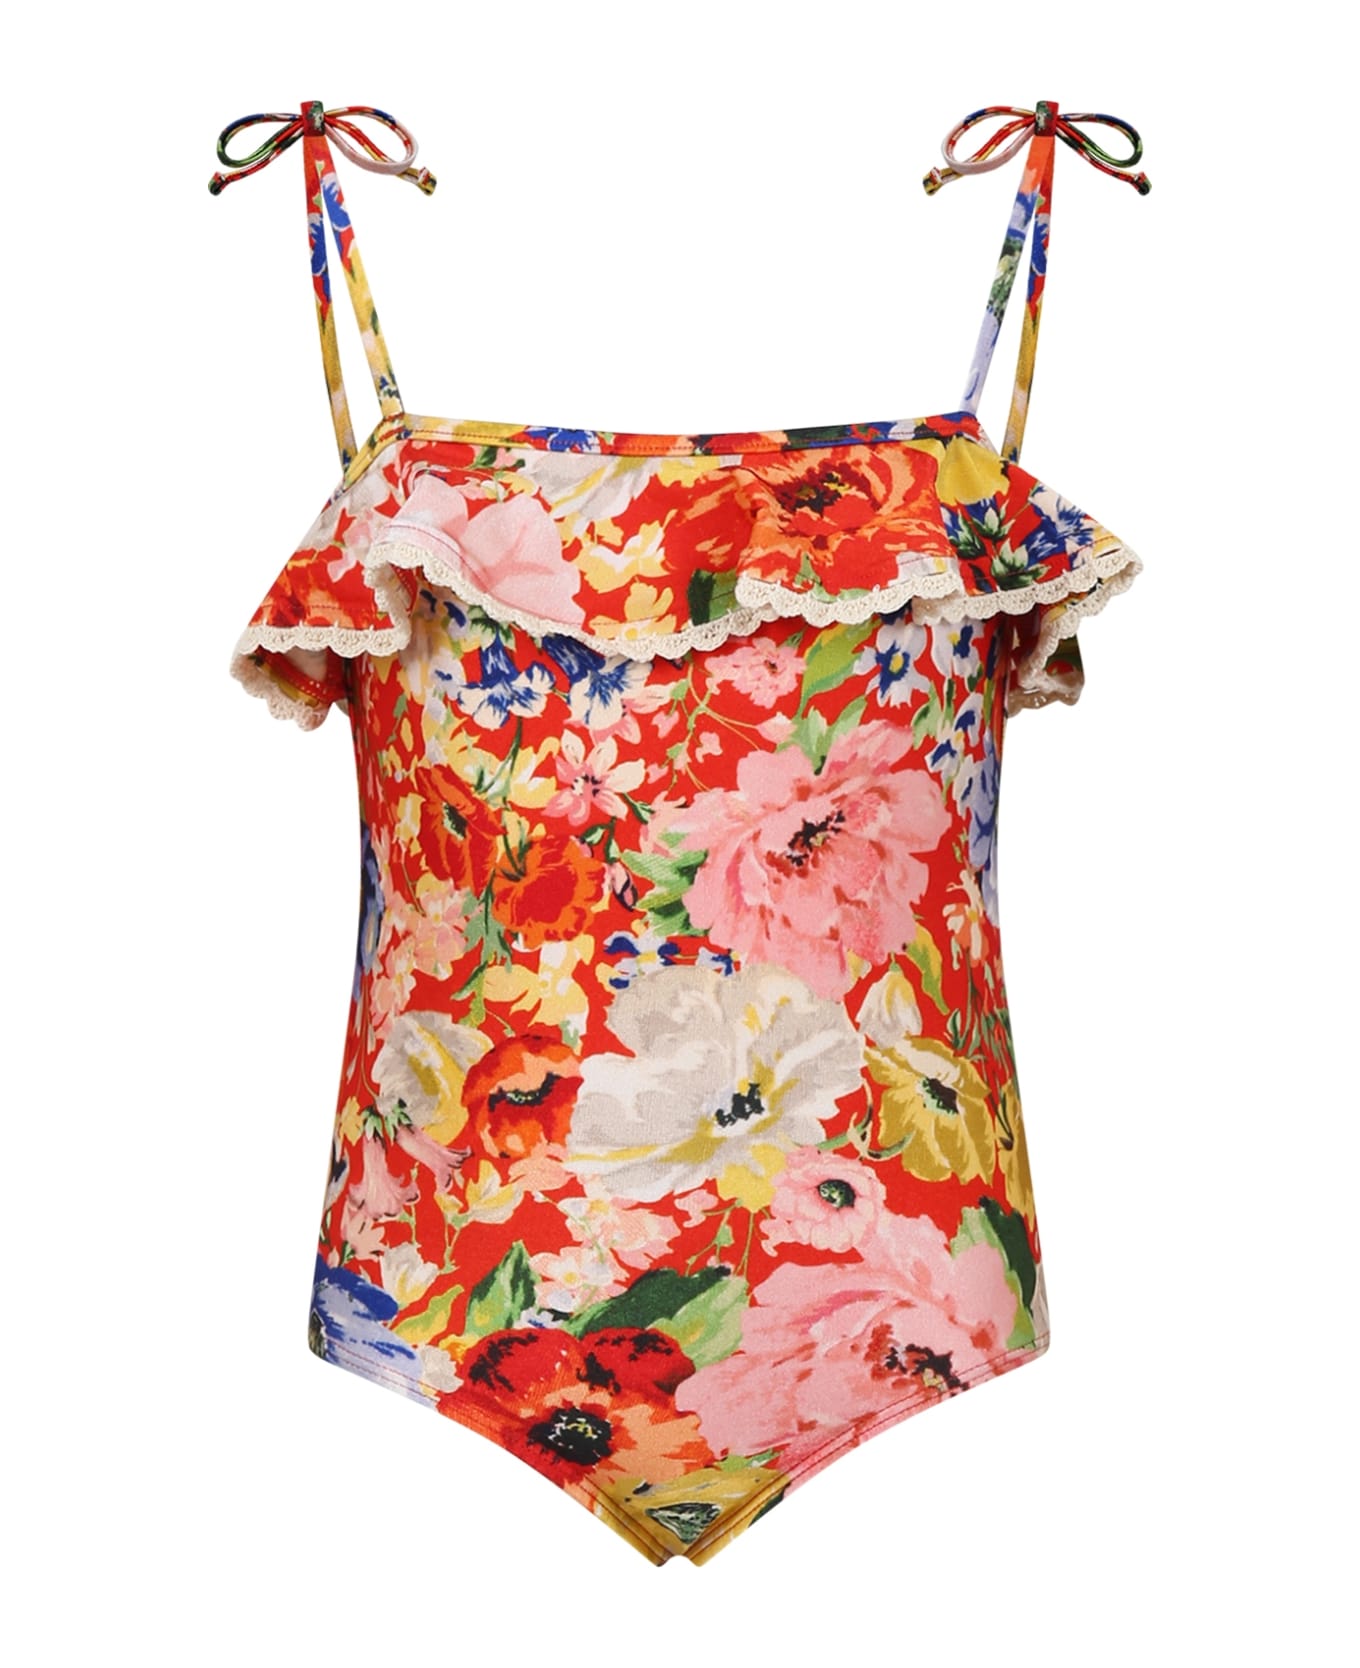 Zimmermann One-piece Red Swimsuit For Girl With Floral Print - Multicolor 水着